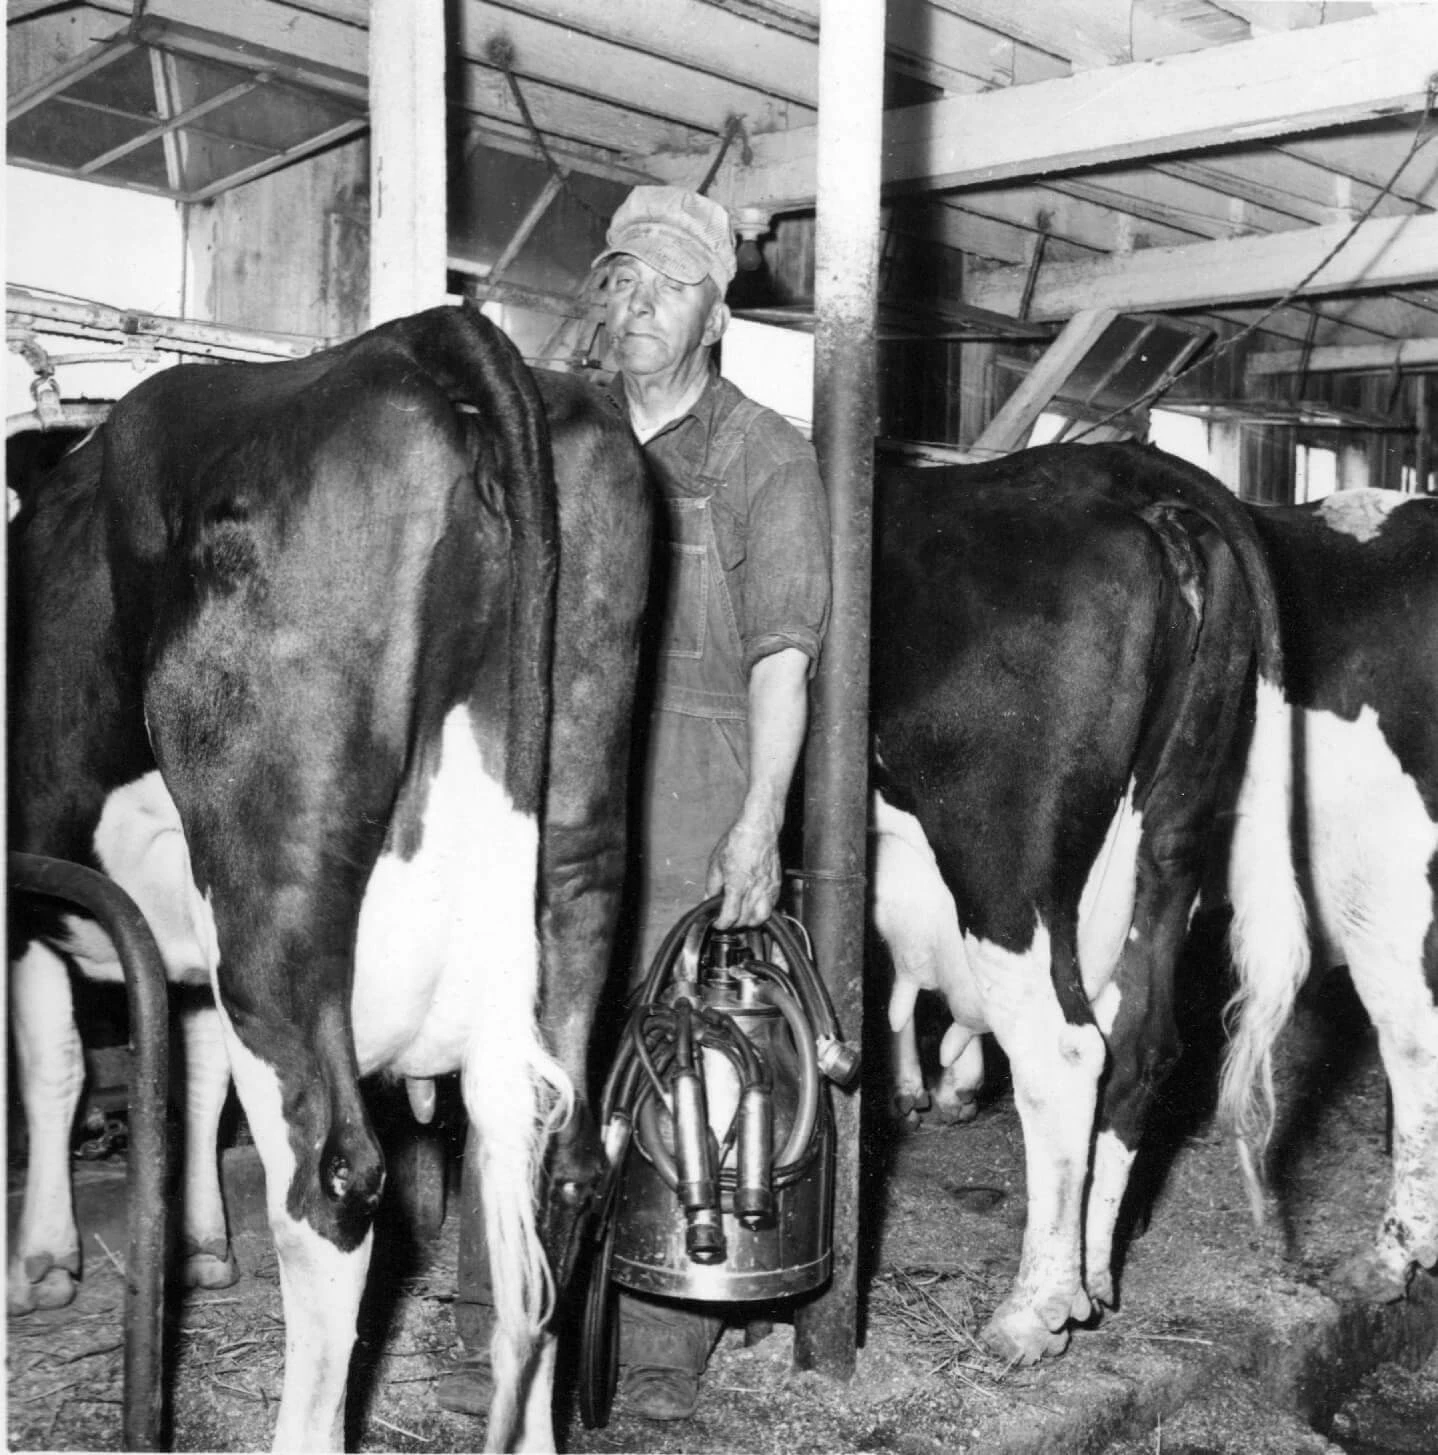 Middle aged man in hat and denim overalls holds a milking device while standing between three cows.